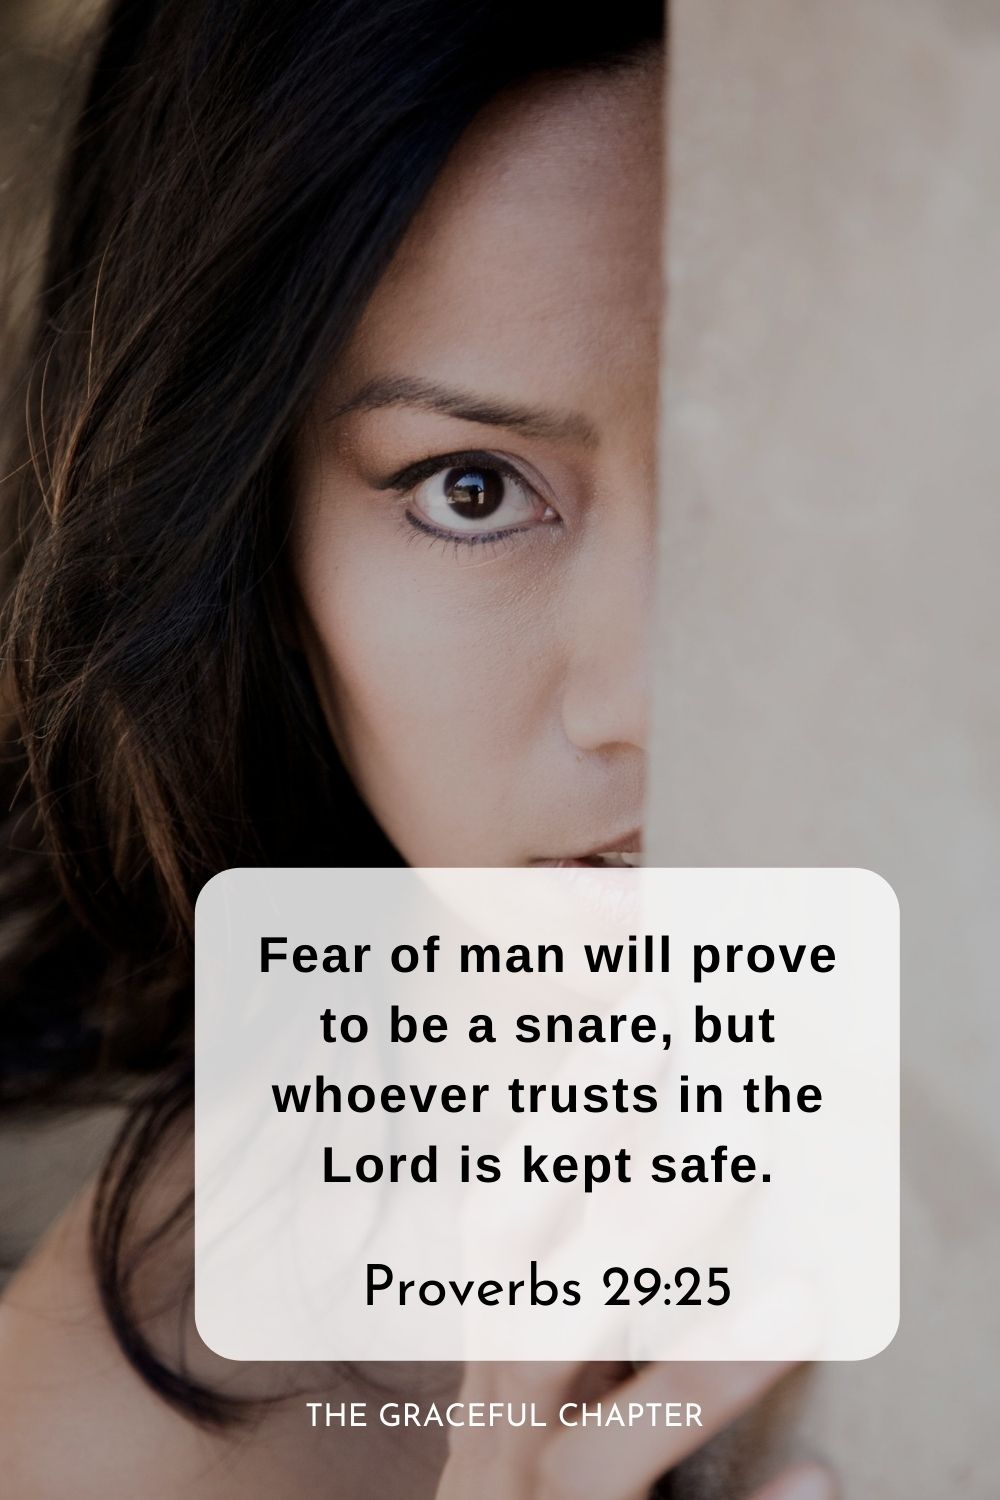 Fear of man will prove to be a snare, but whoever trusts in the Lord is kept safe.